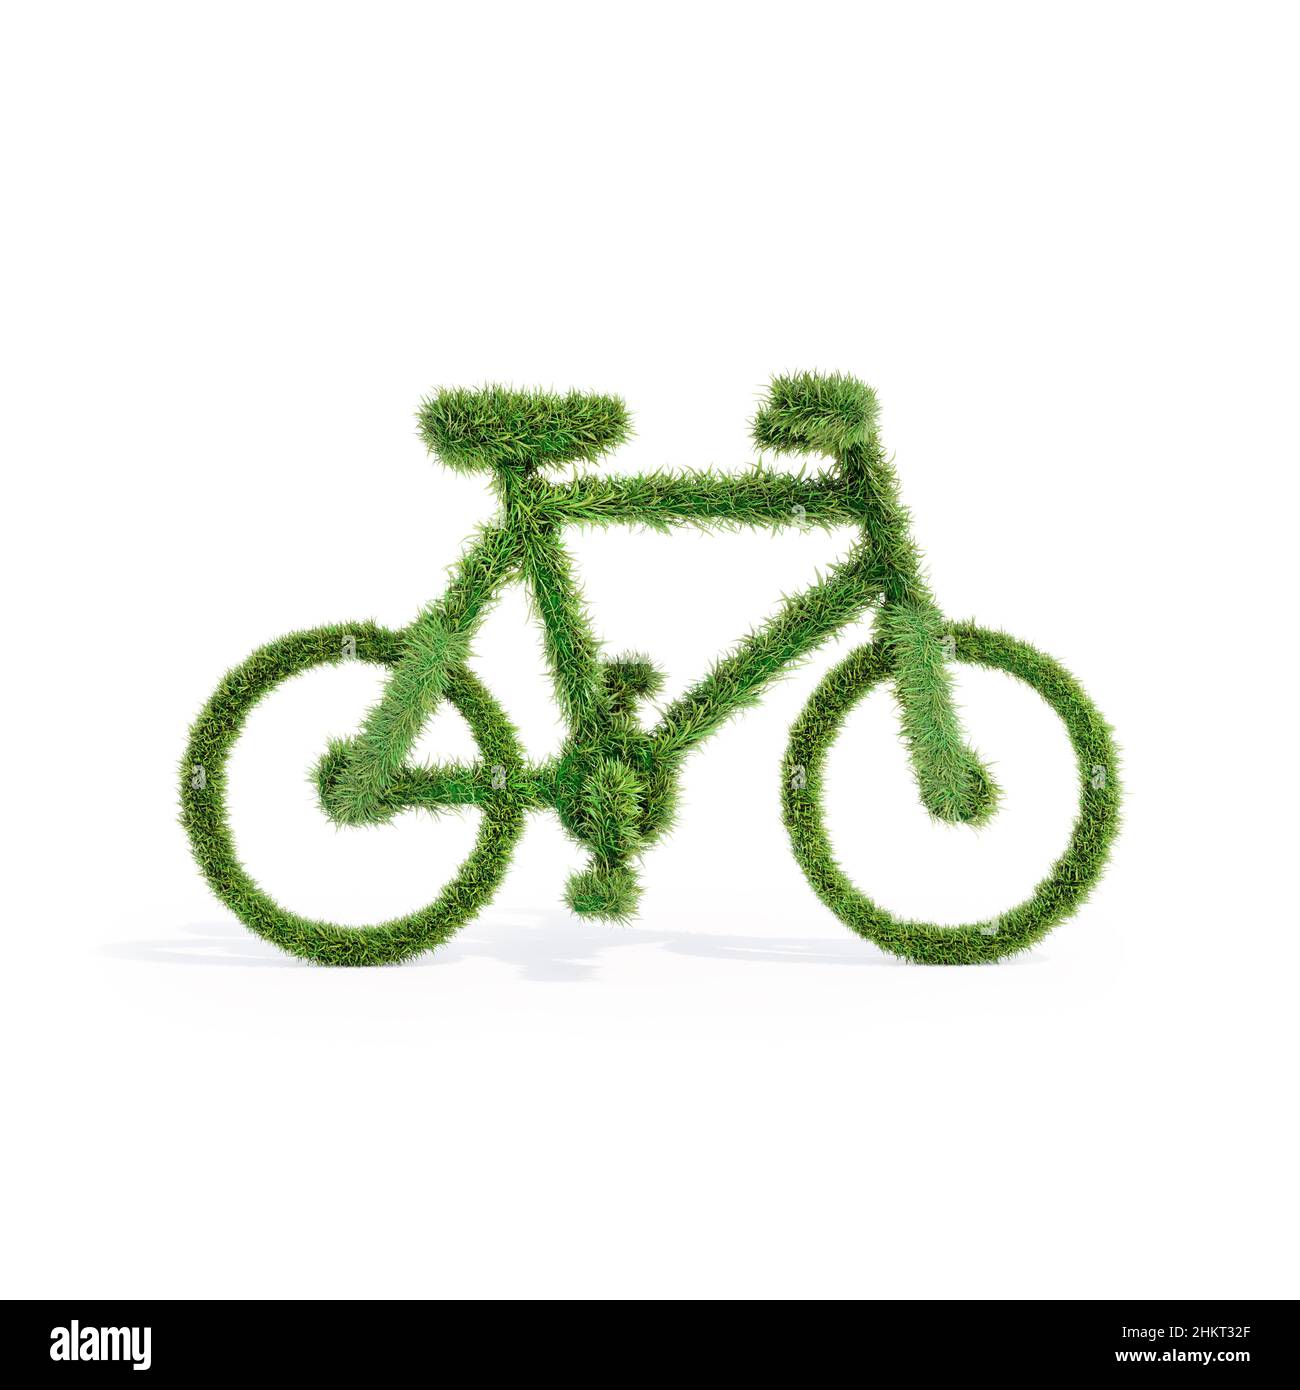 3D rendering of grass covered simplified bicycle shape - environmental awareness concept Stock Photo